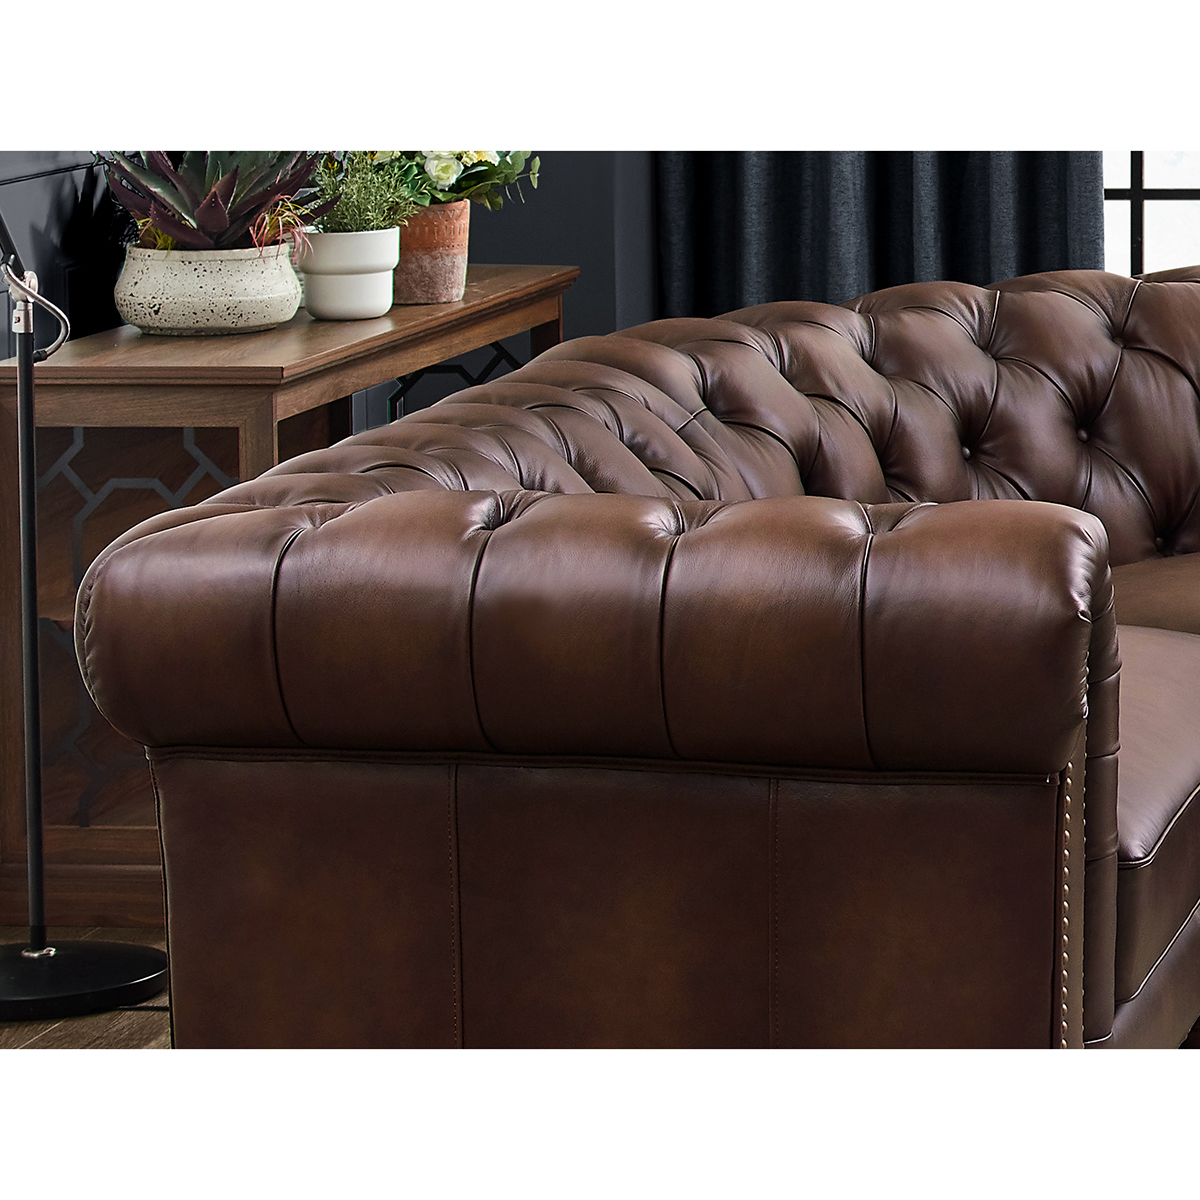 Image of Allington Leather Chesterfield Corner Sofa, Brown